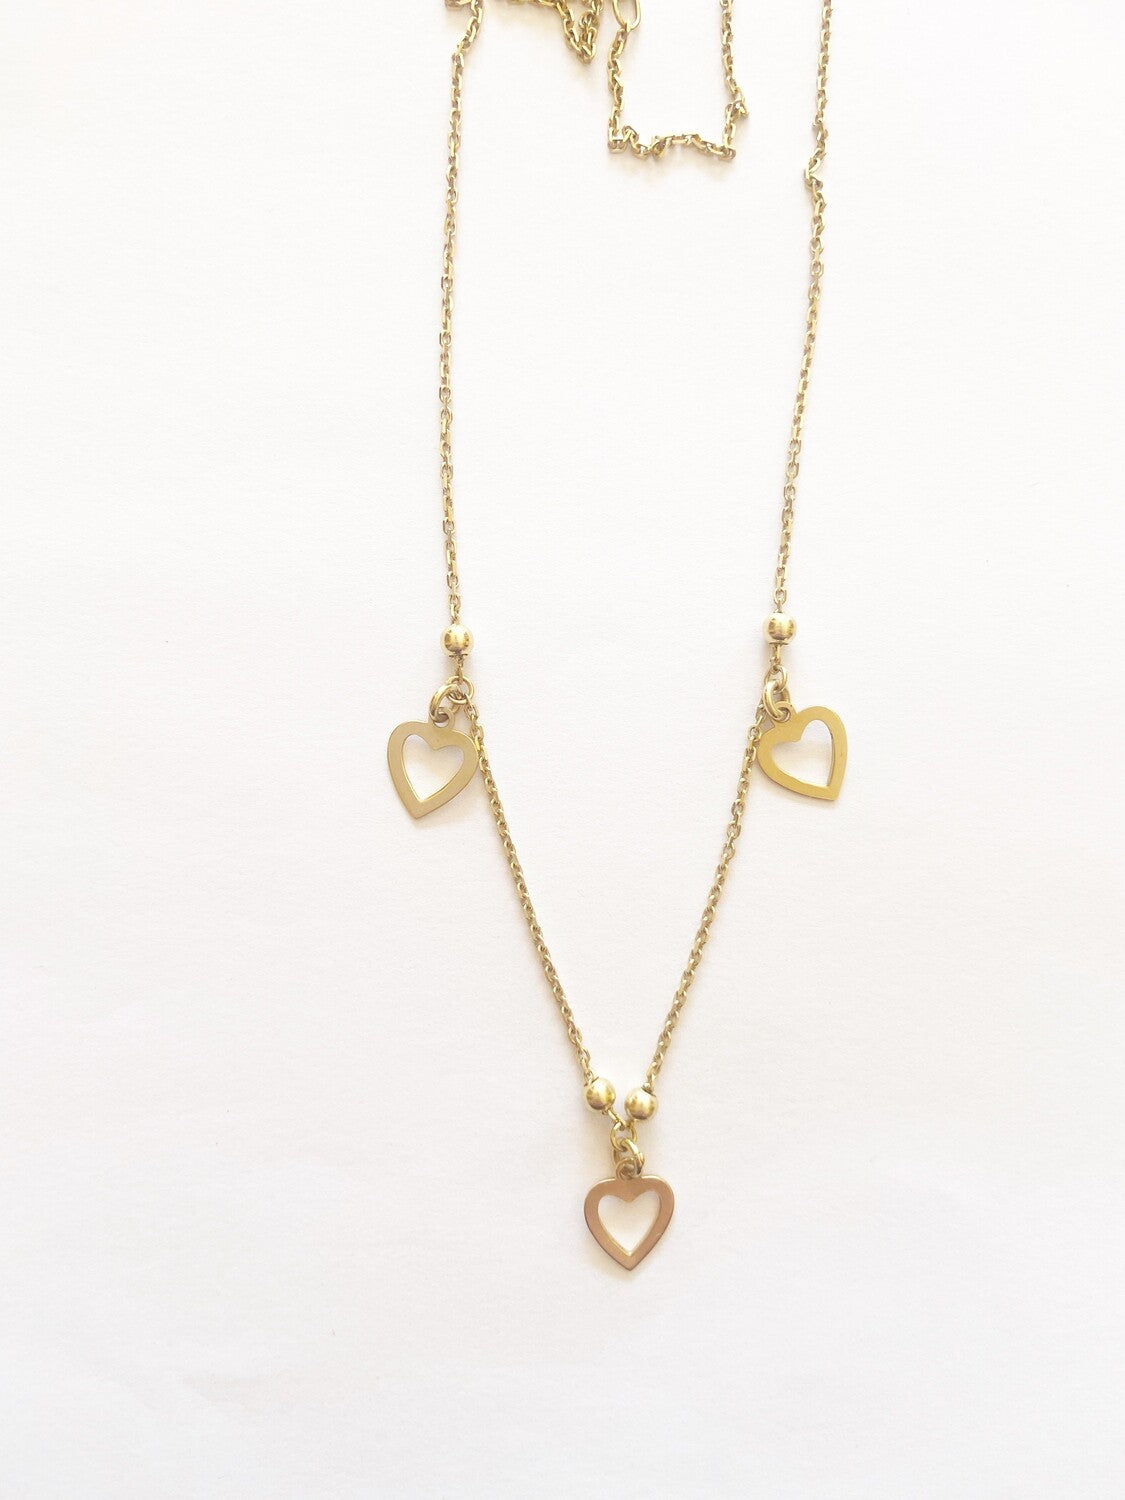 9ct vintage heart necklace 16 inches